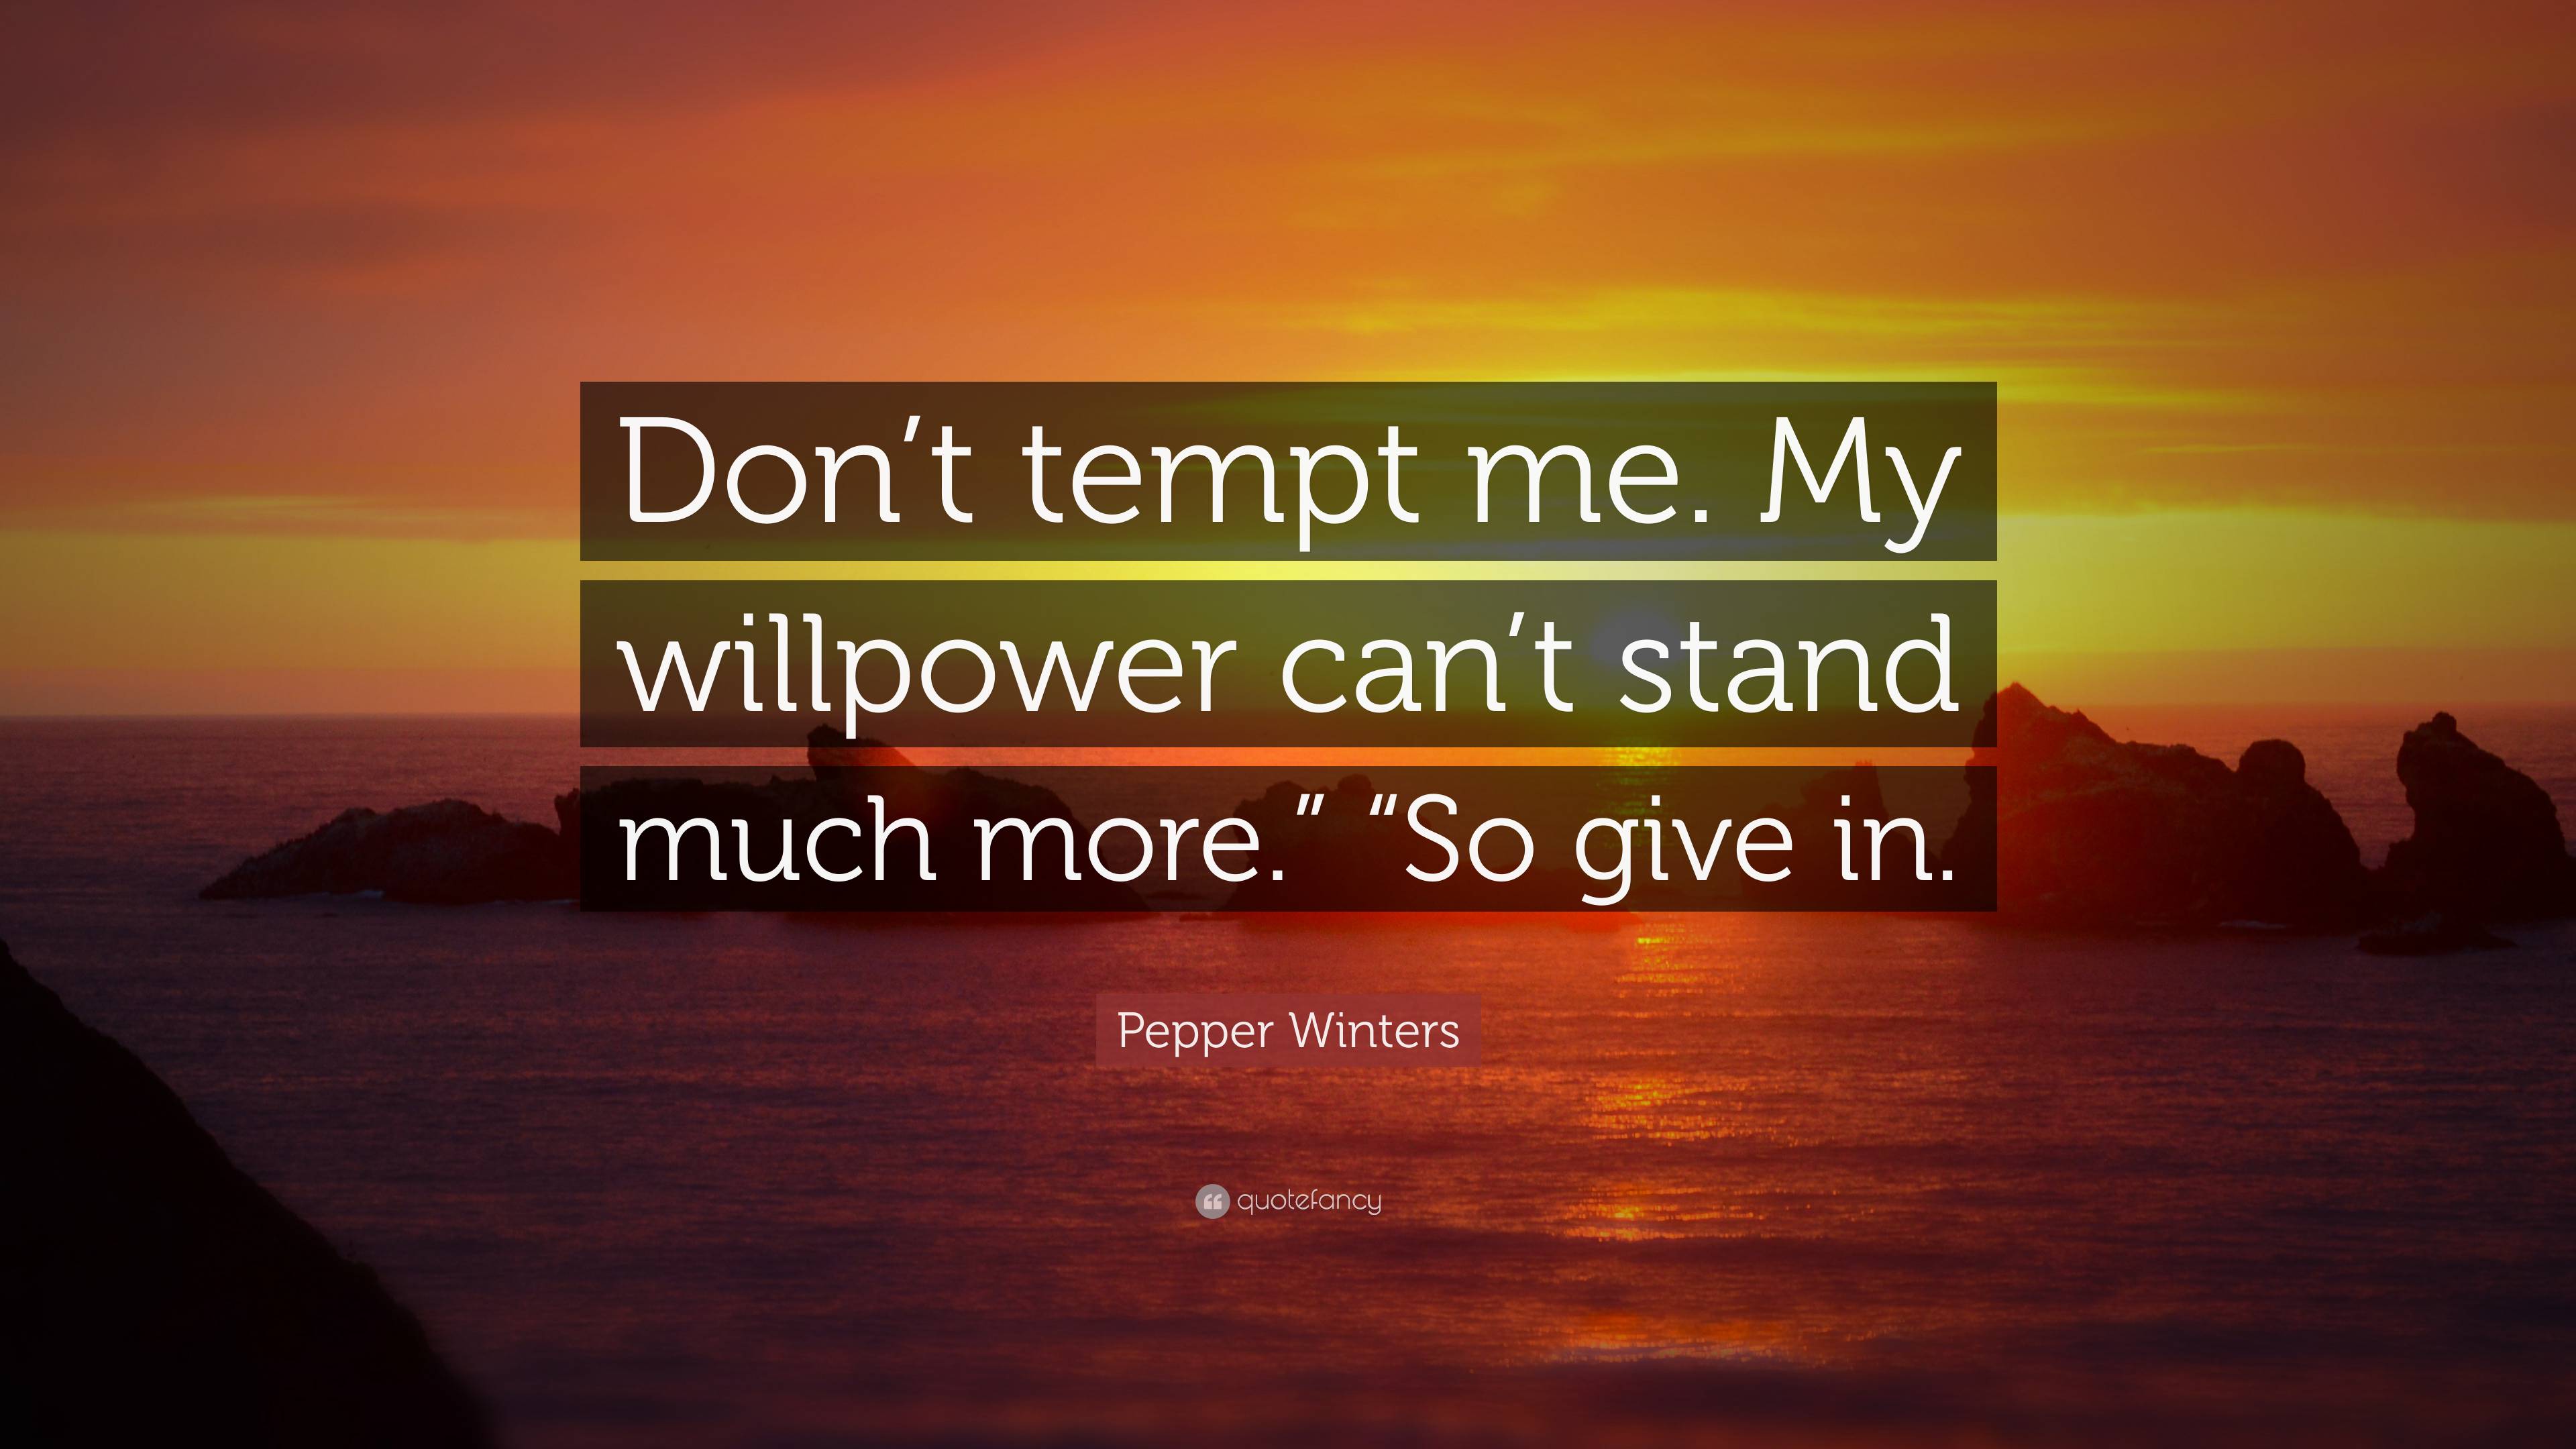 Pepper Winters Quote: “Don't tempt me. My willpower can't stand much more.”  “So give